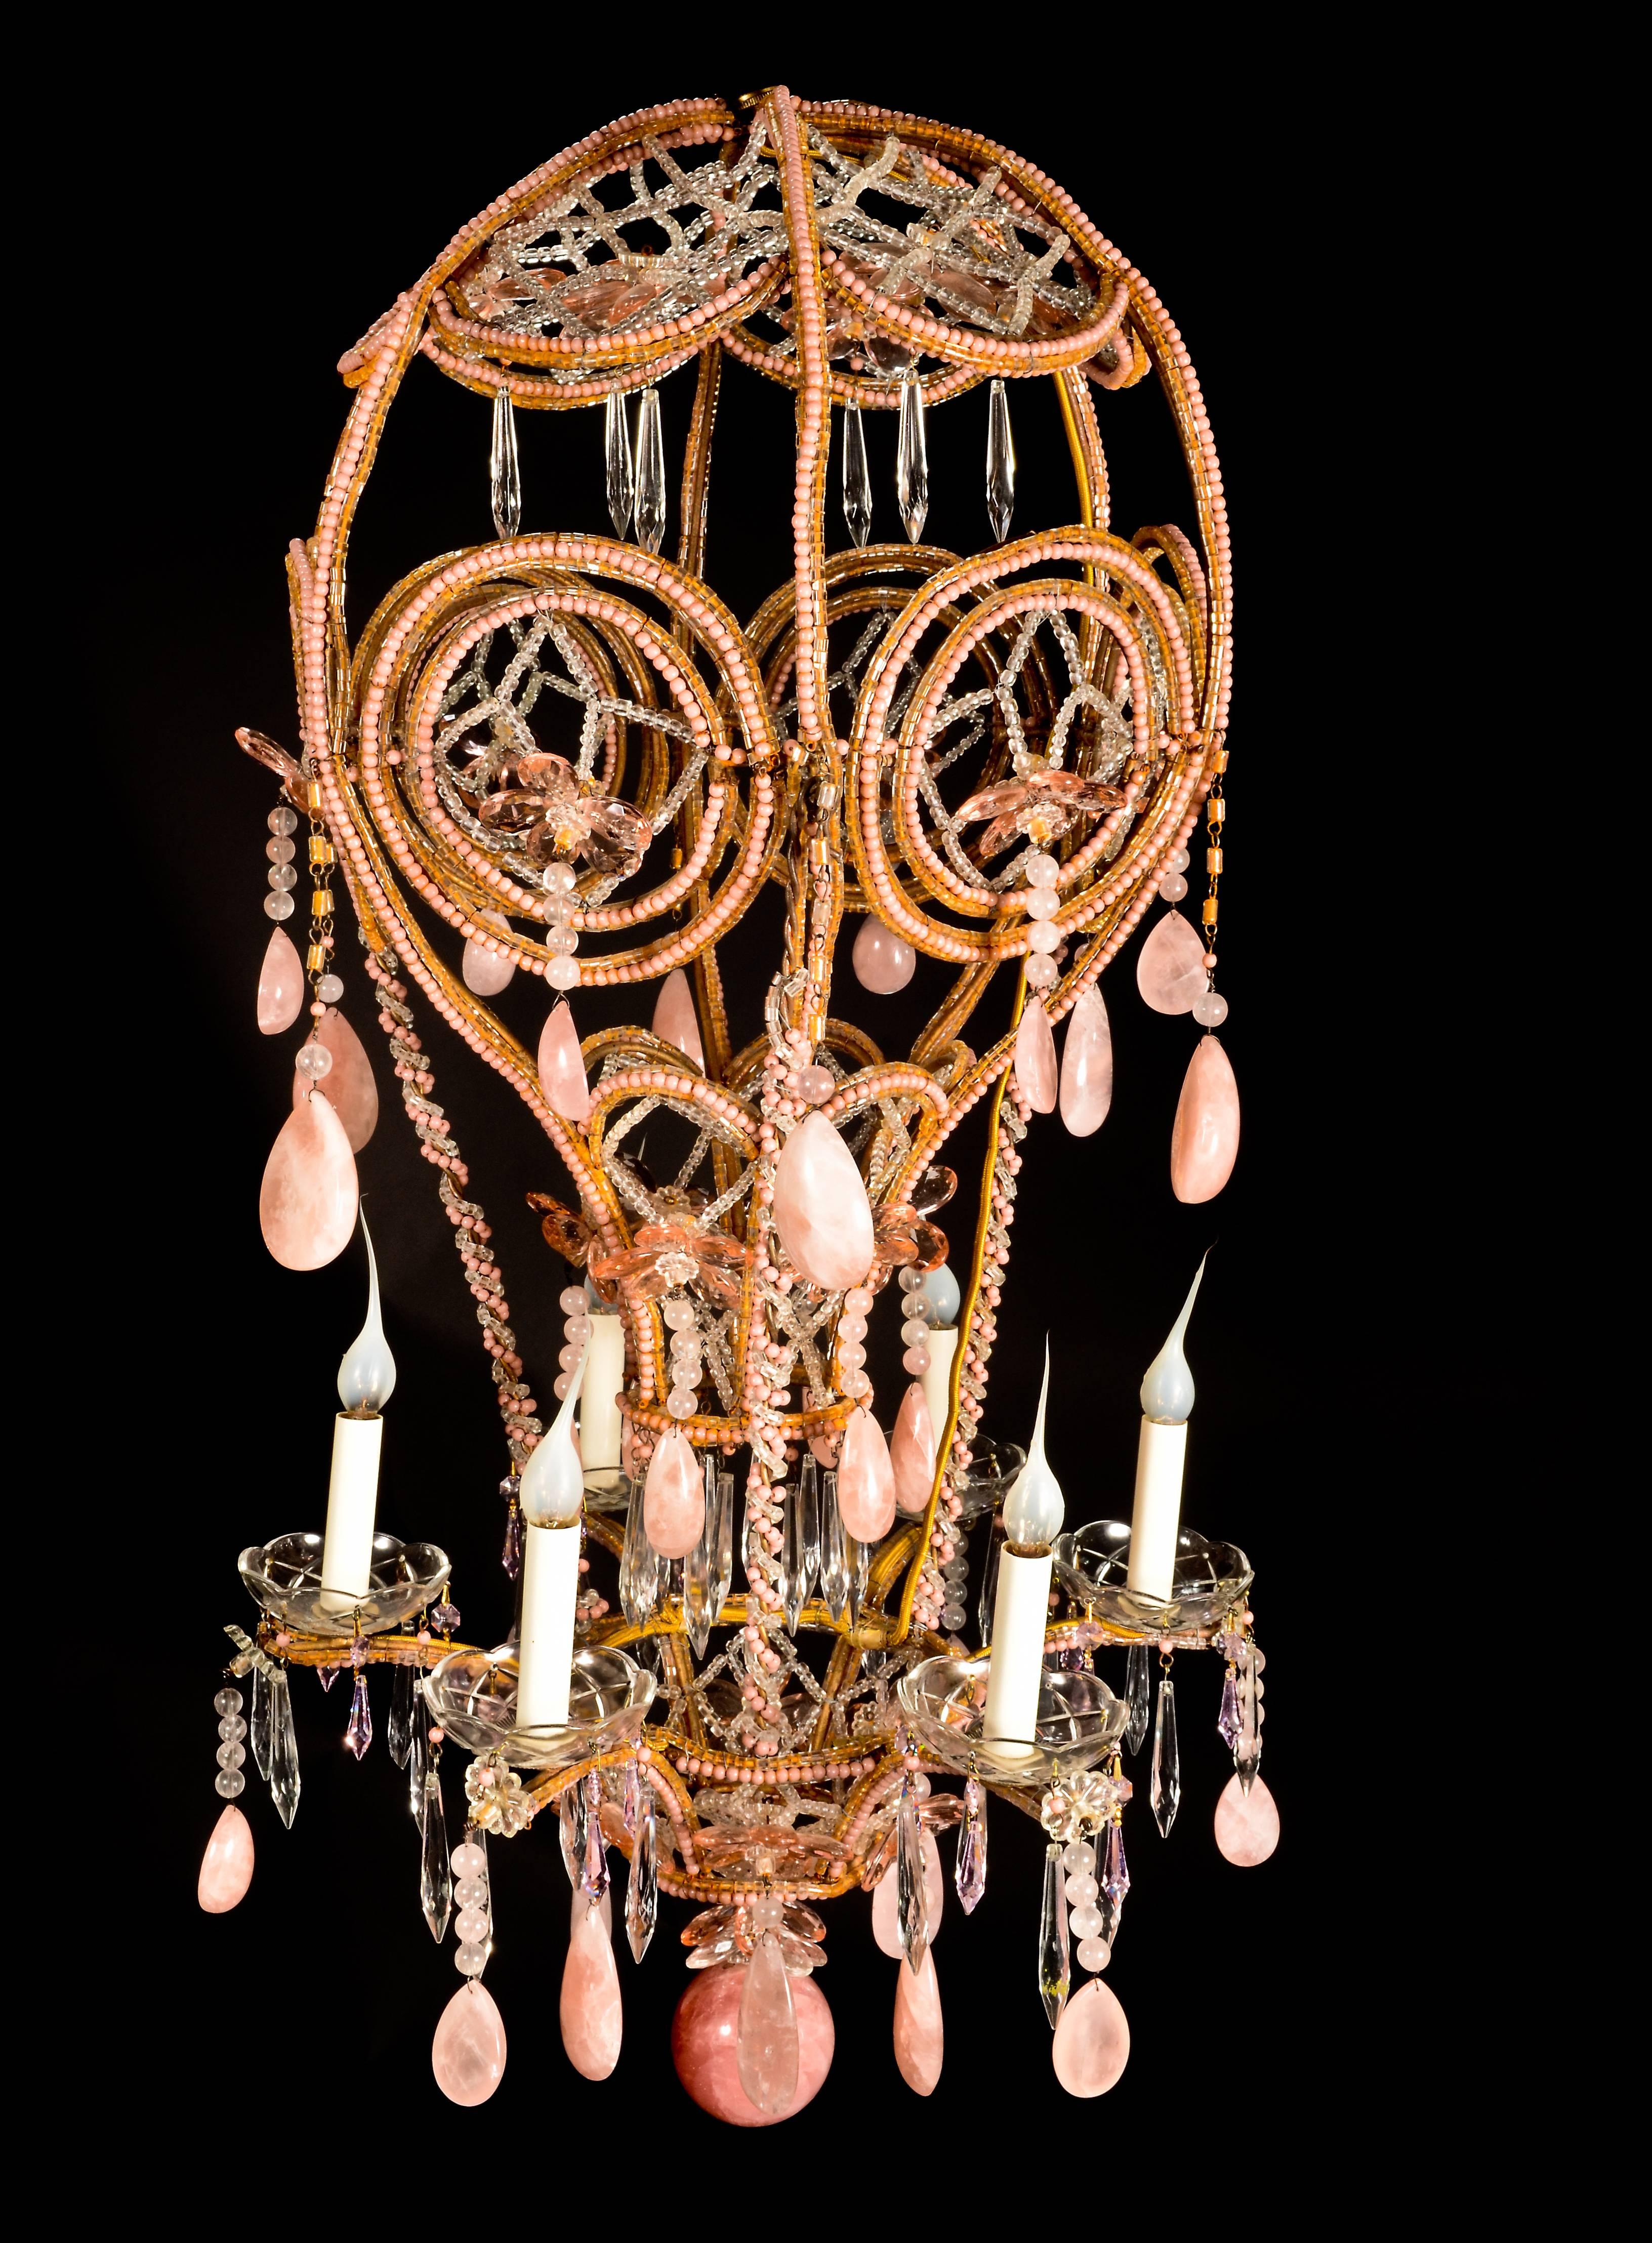 A superb antique French Louis XVI style pink rock crystal hot air balloon chandelier of great detail embellished with cut pink rock crystal prisms, beaded glass, crystal prisms and a central pink rock crystal ball in the style of Bagues.